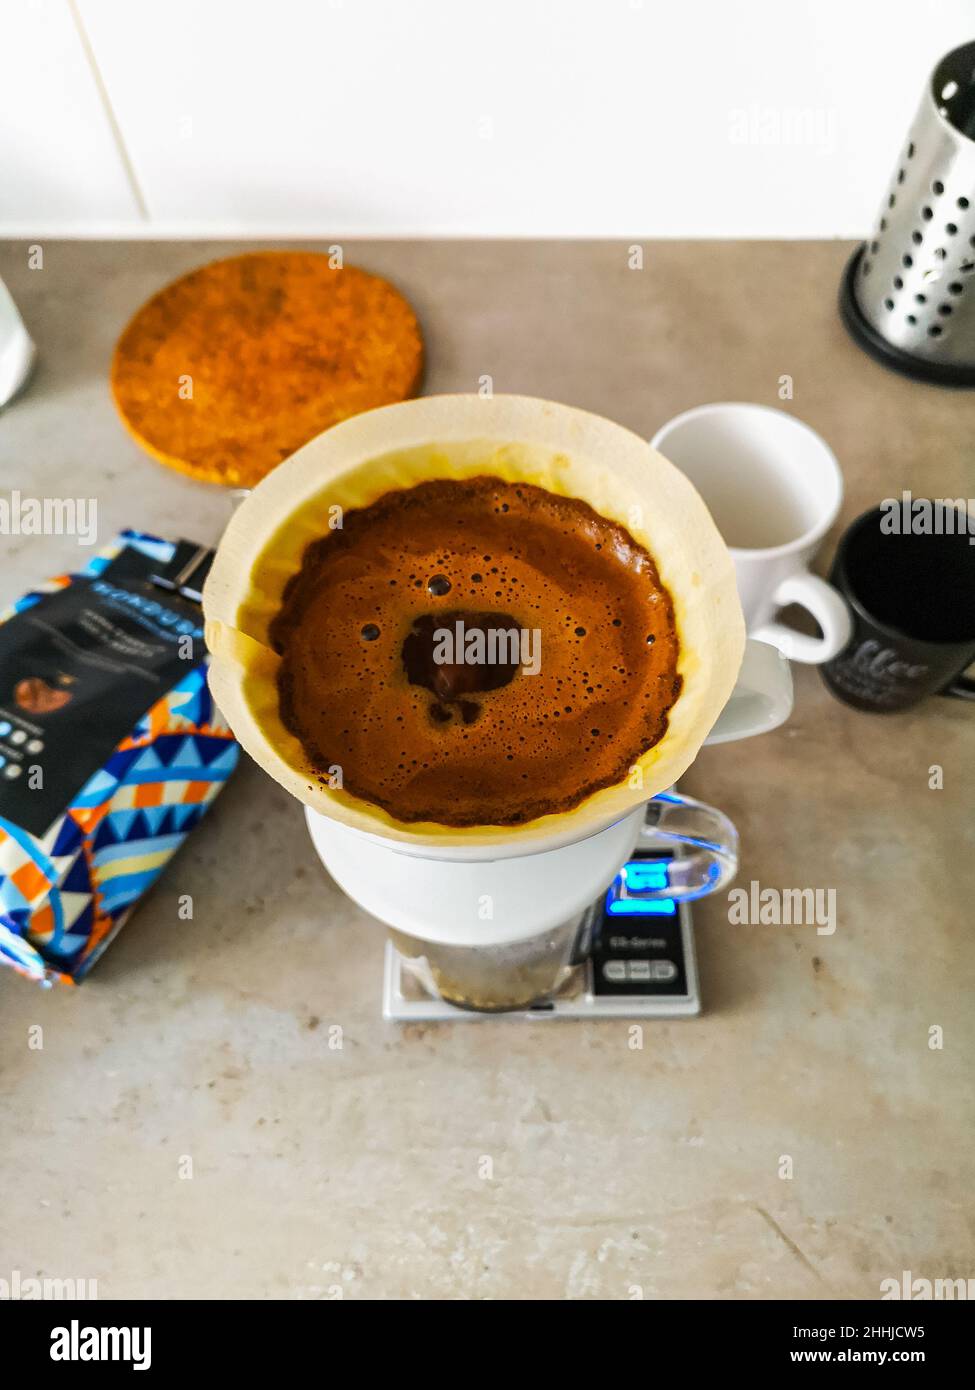 Preparing a pot of black filtered coffee by dripper v60 Stock Photo